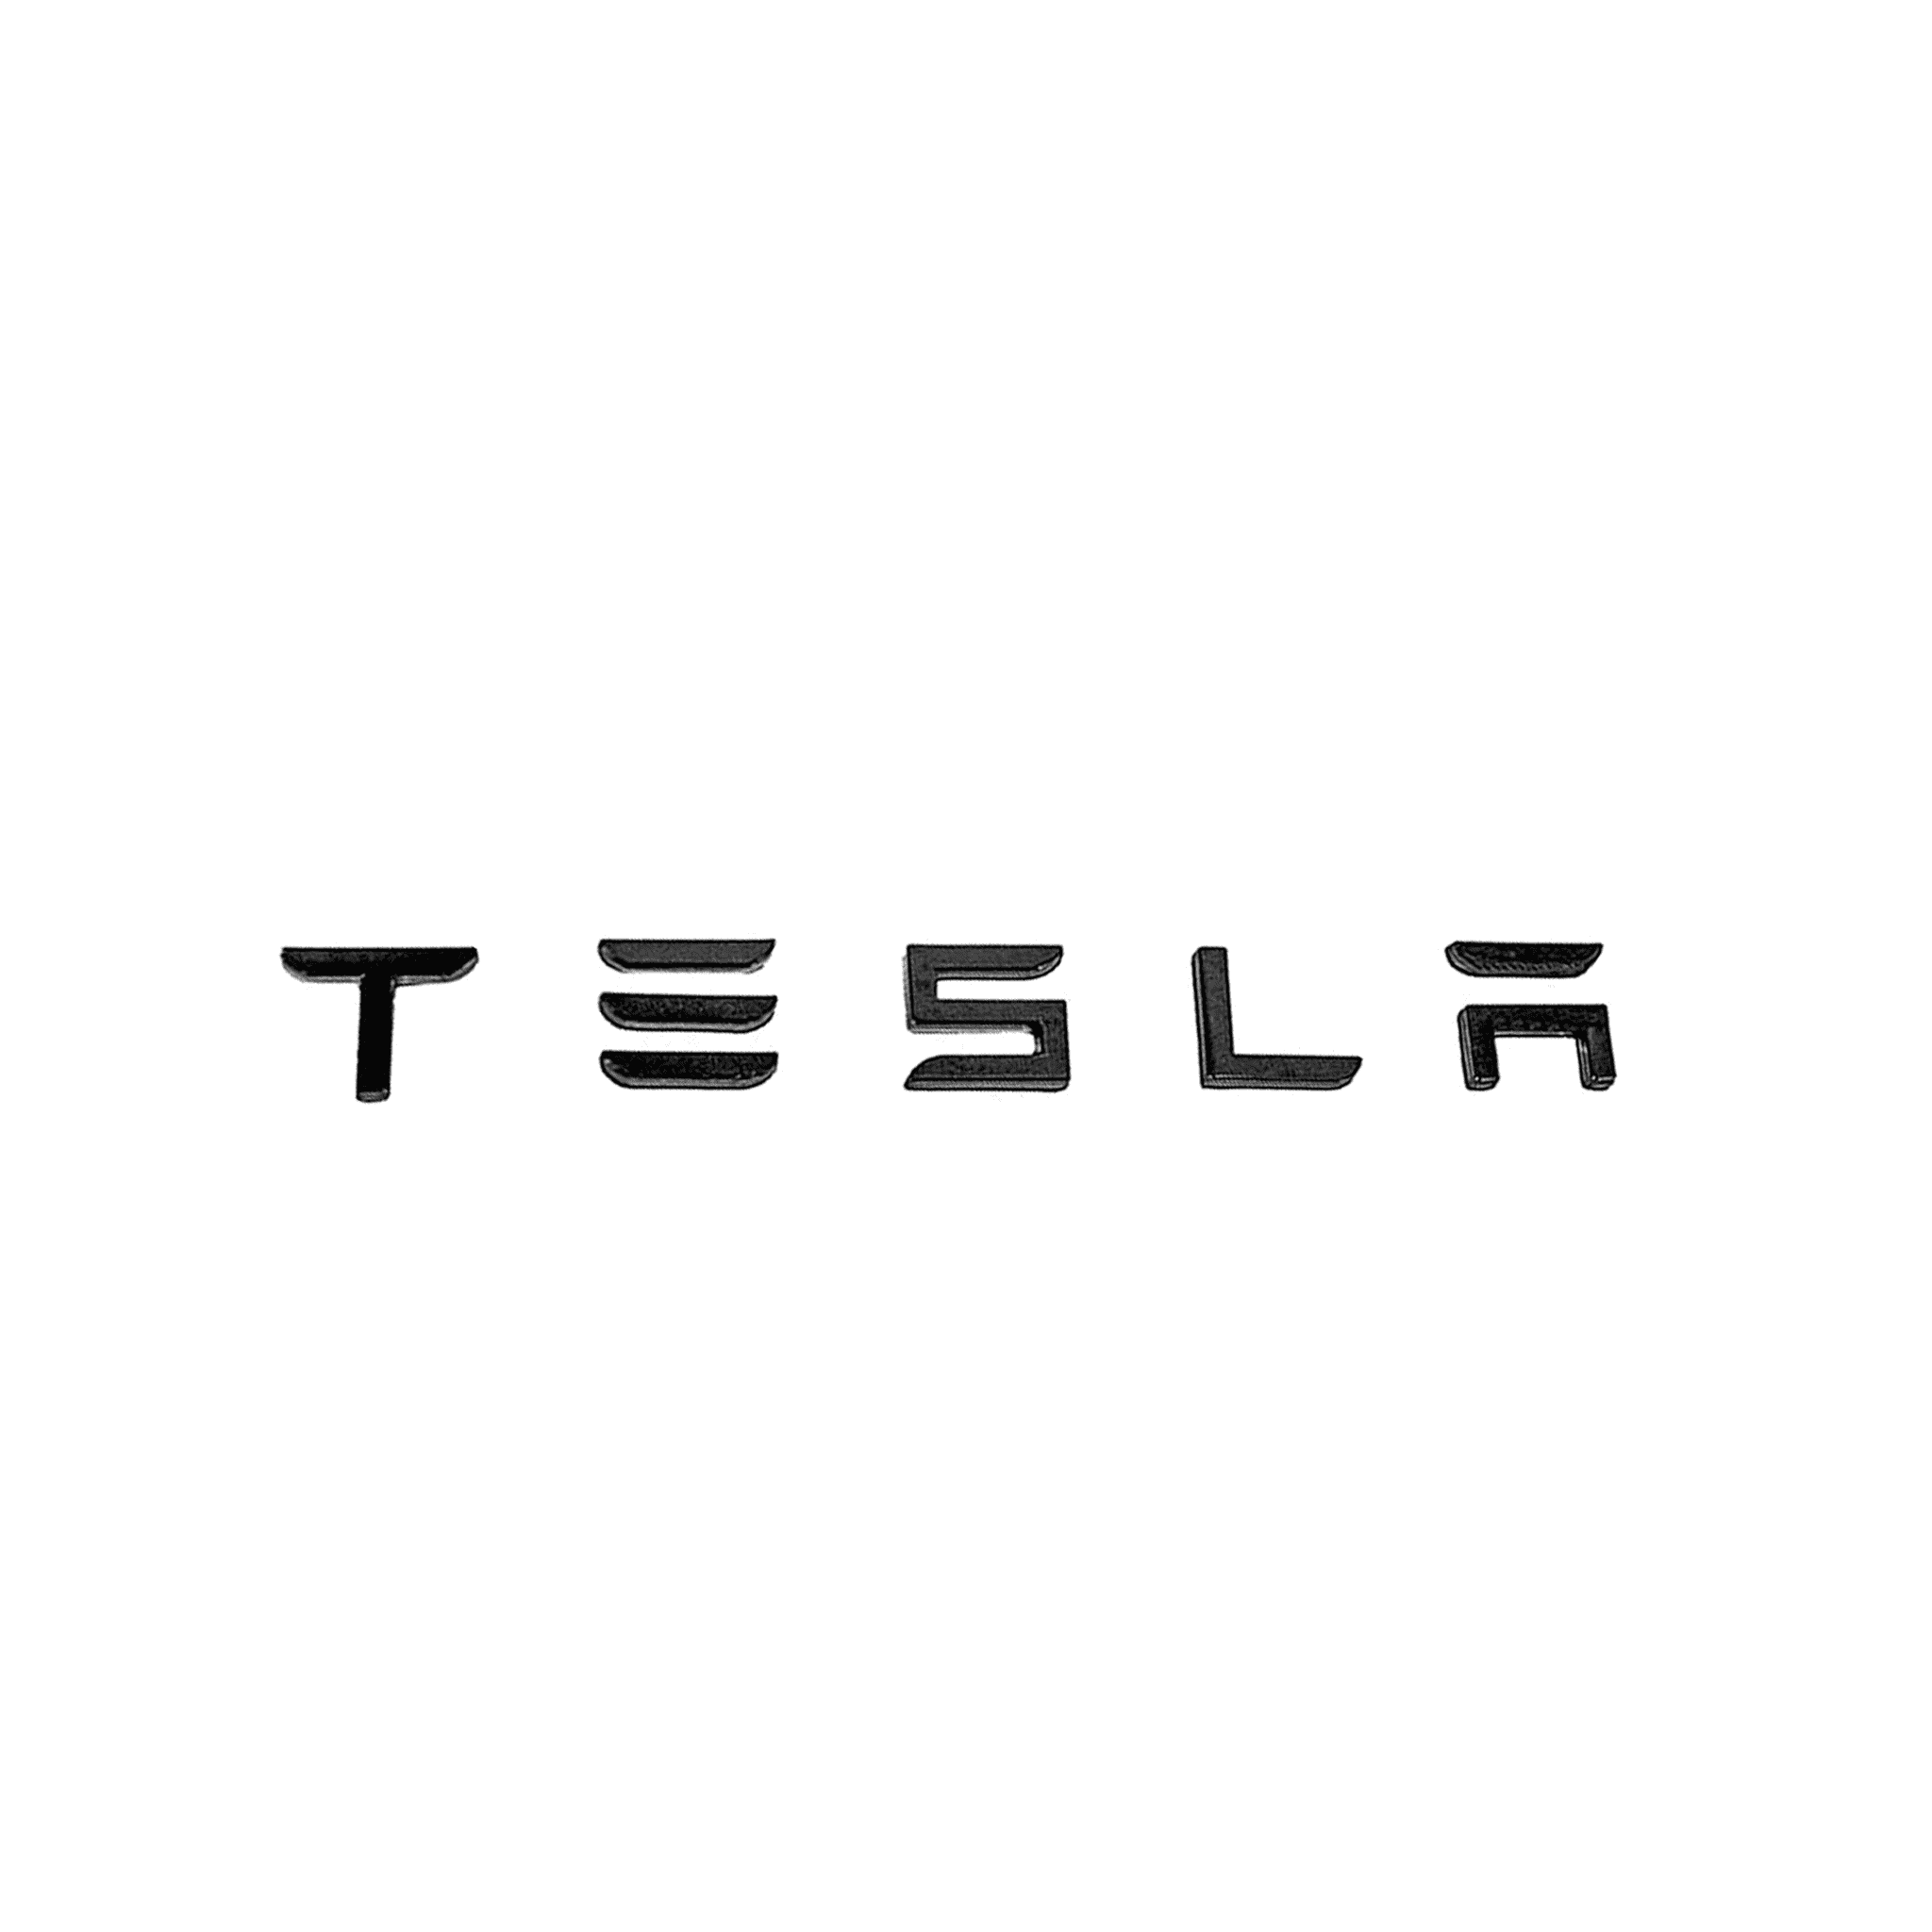 YHCDSEA 3D Raised Tesla Tailgate Insert Letters Emblems ABS Material  Compatible with Tesla Model 3 YSX Series Accessories (Glossy Black)